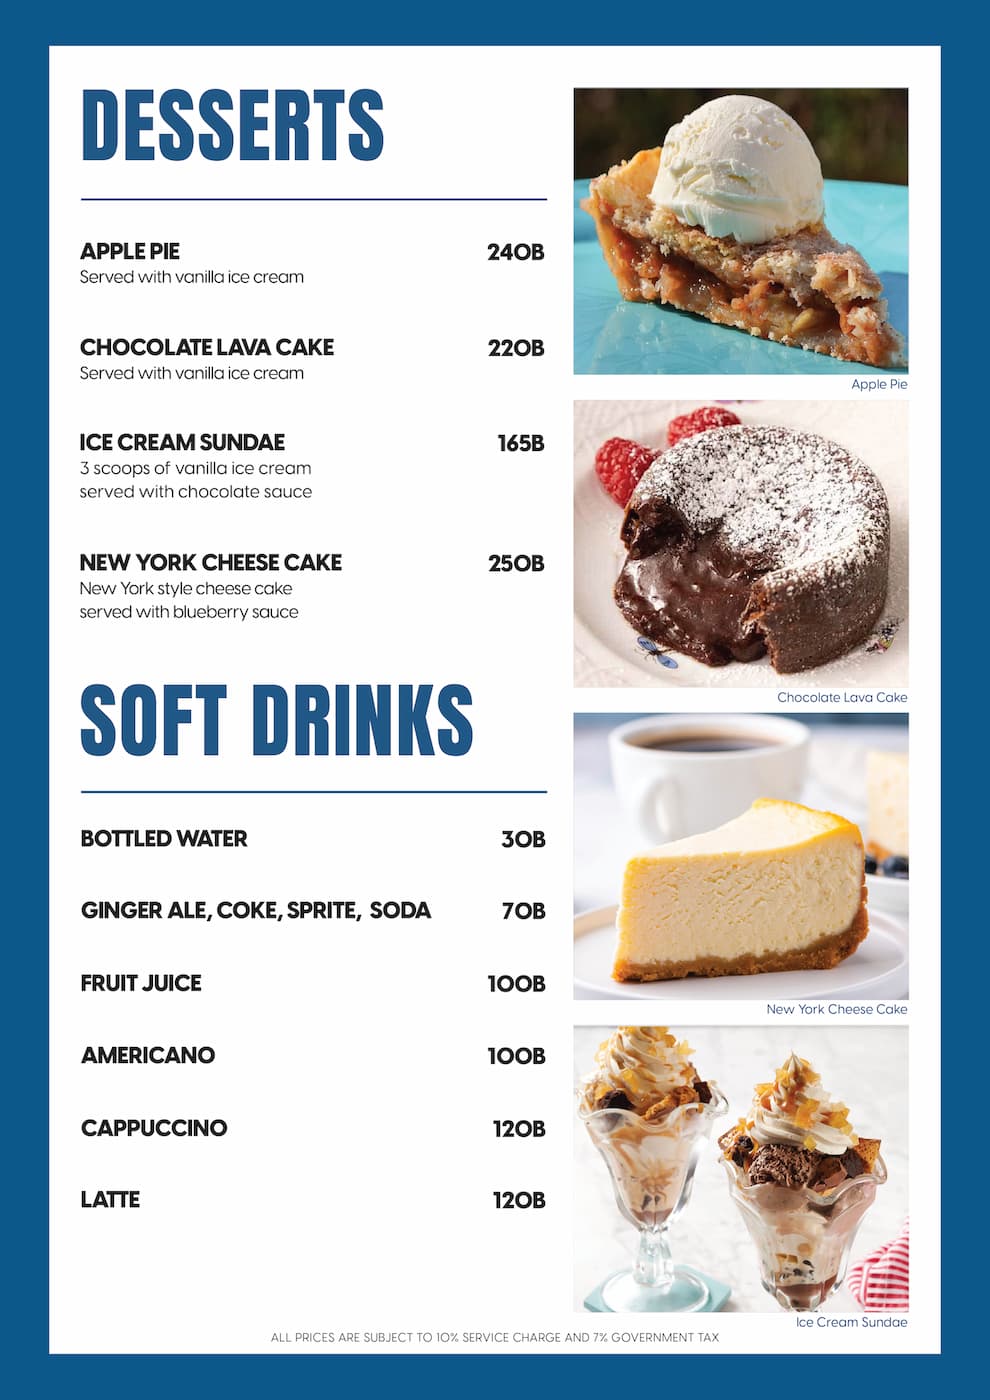 DESSERTS AND SOFT DRINKS